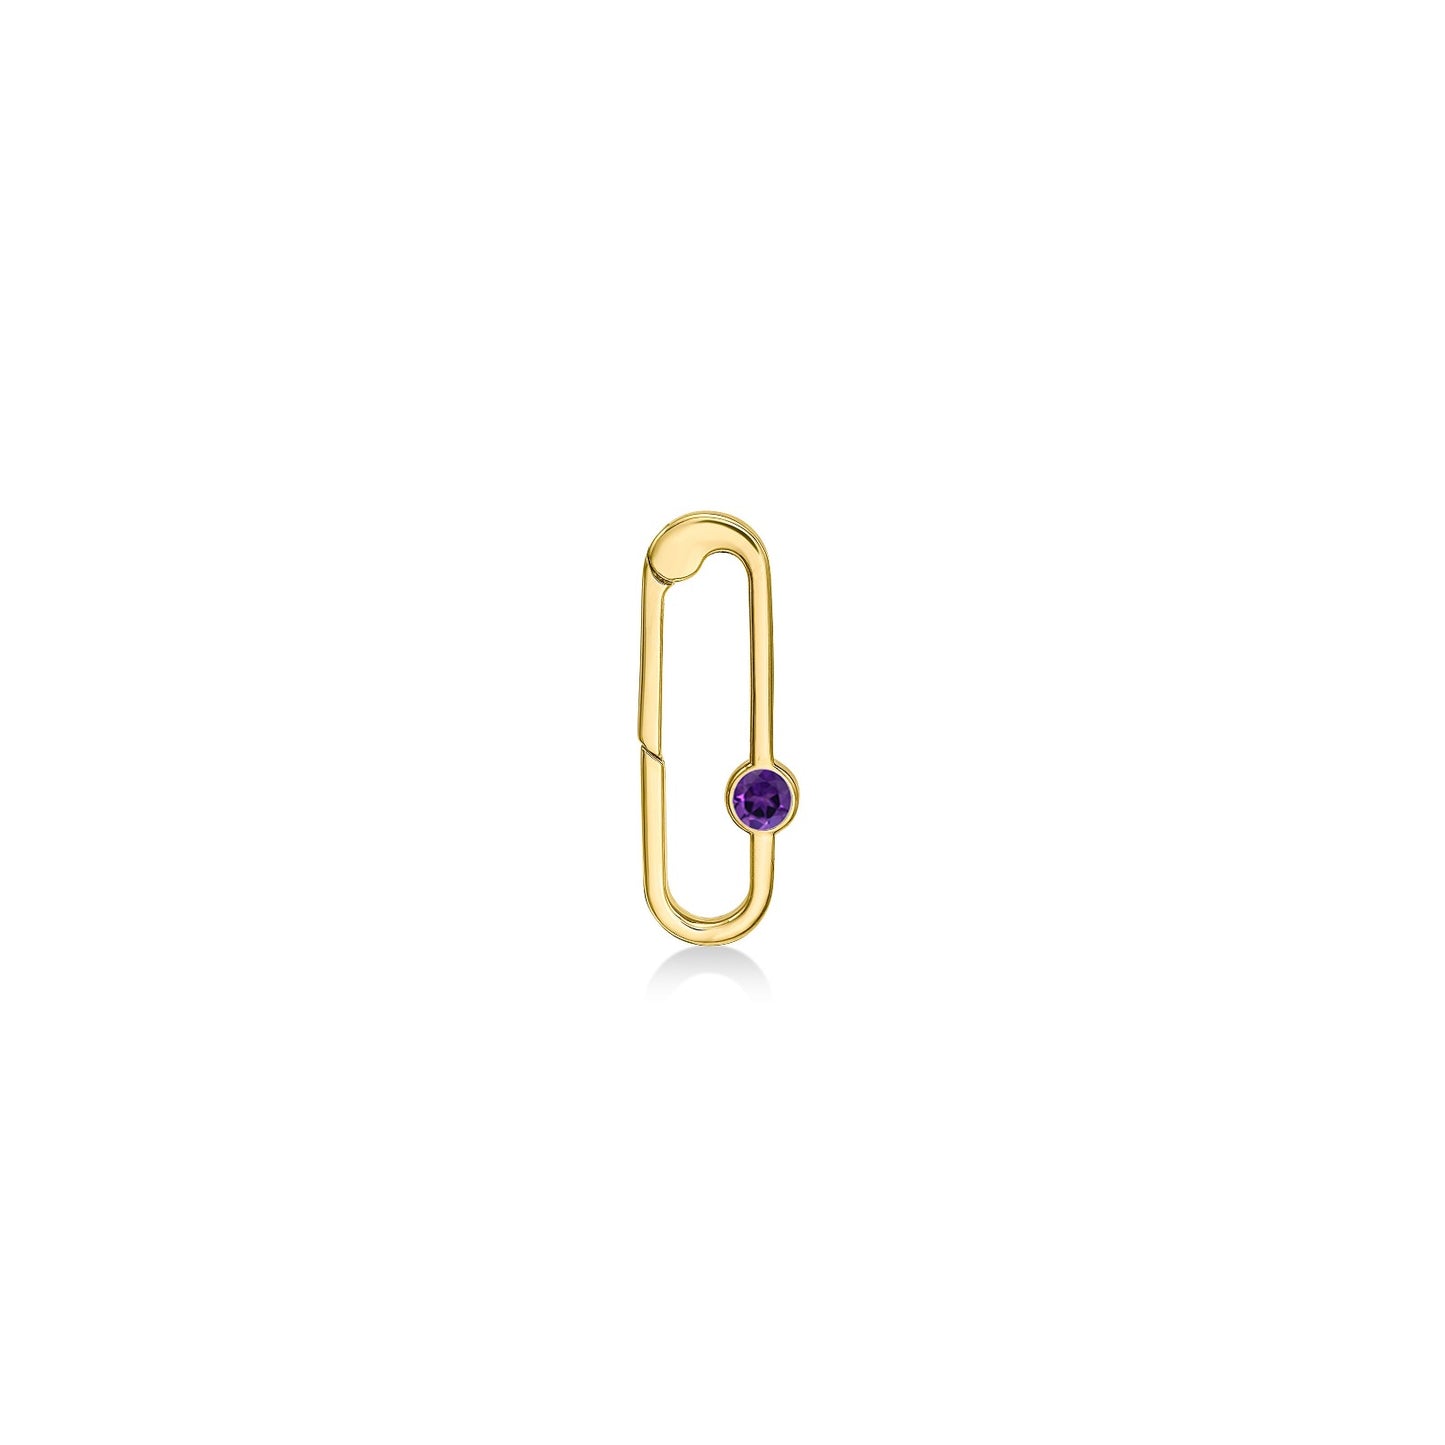 14k gold paperclip charm lock with amethyst